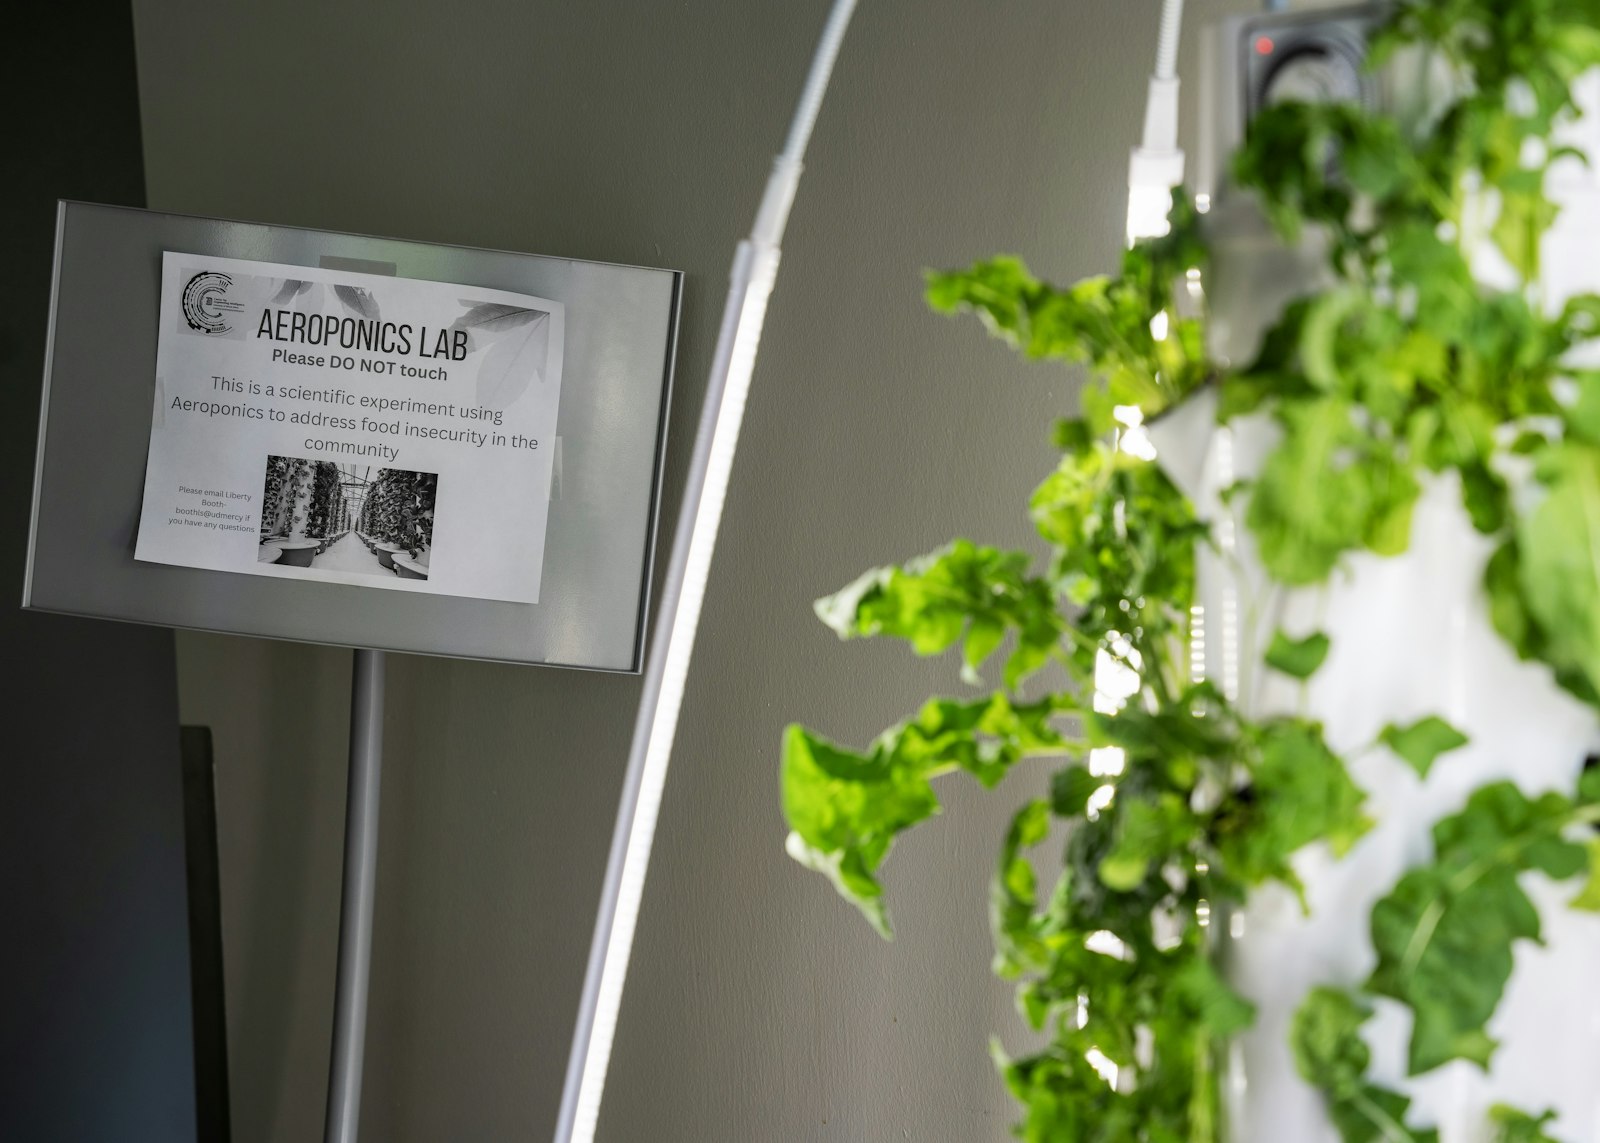 Olla has been working to develop the Detroit Mercy Center for Augmenting Intelligence in Urban Health, which he describes as a “solutions hub” that will use technology and artificial intelligence to address community health care needs. The aeroponics garden is a small example of how this can be done, Olla explained.